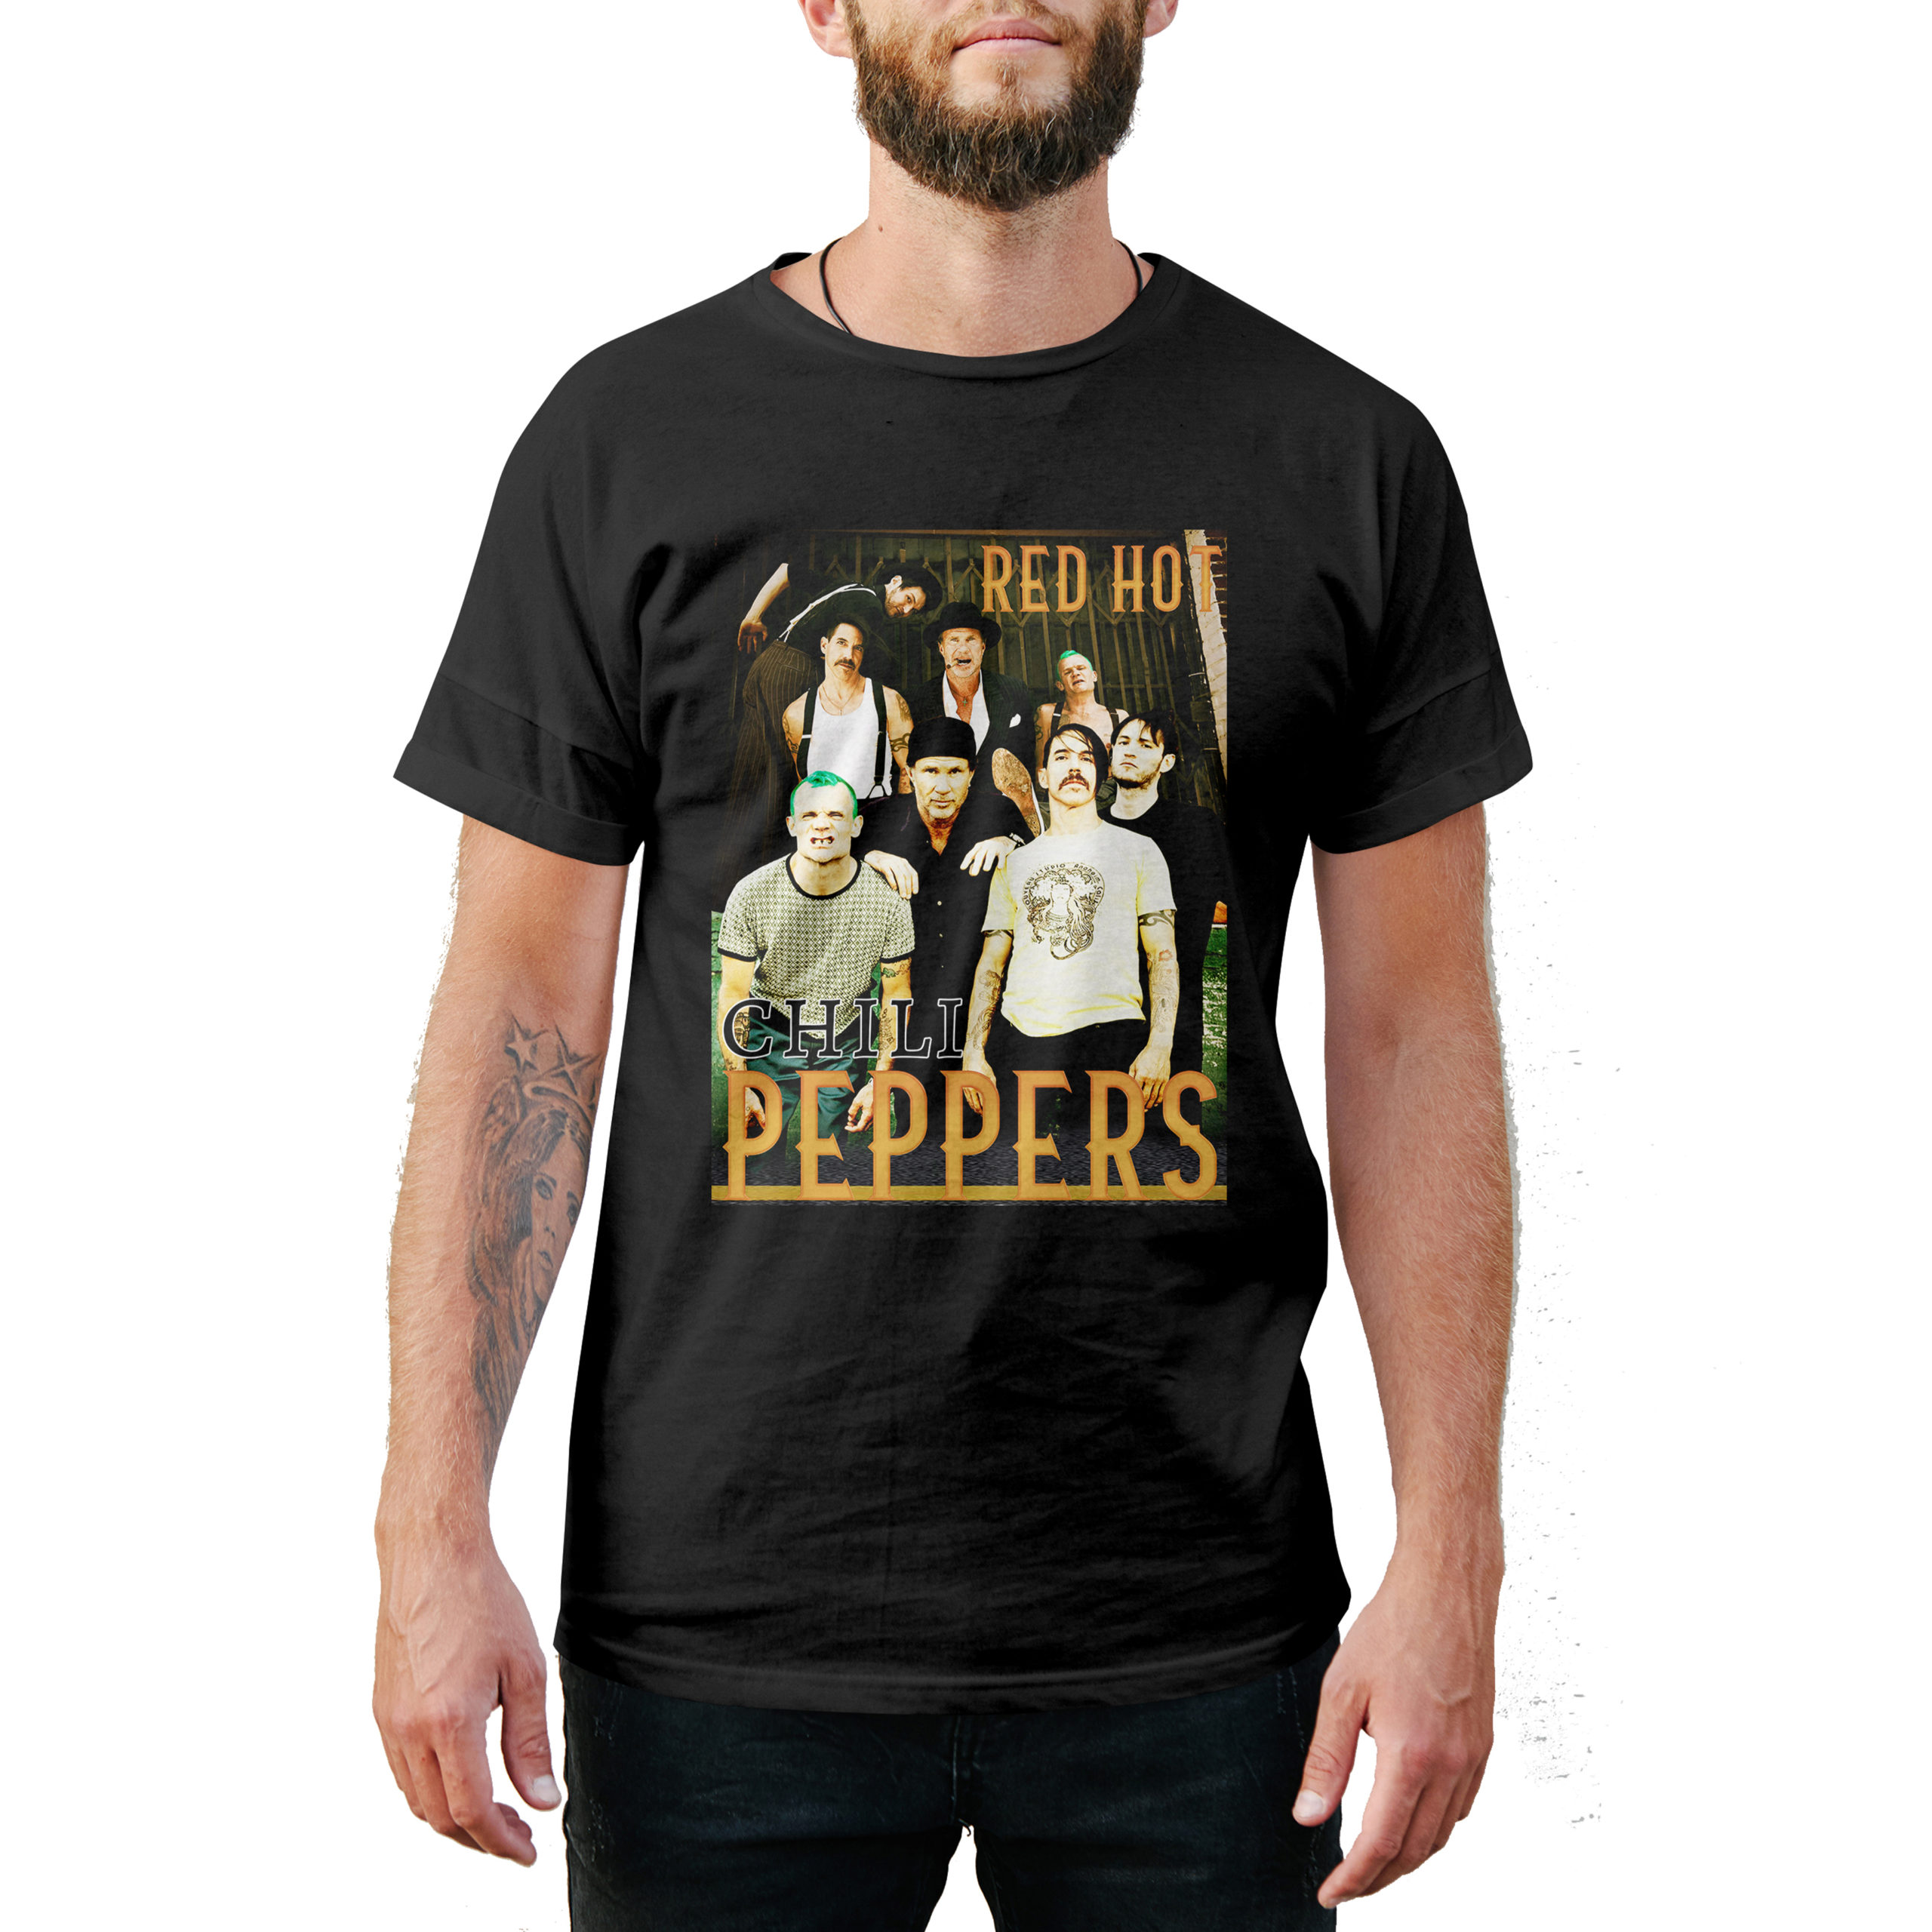 Vintage Style Red Hot Chilli Peppers T-Shirt